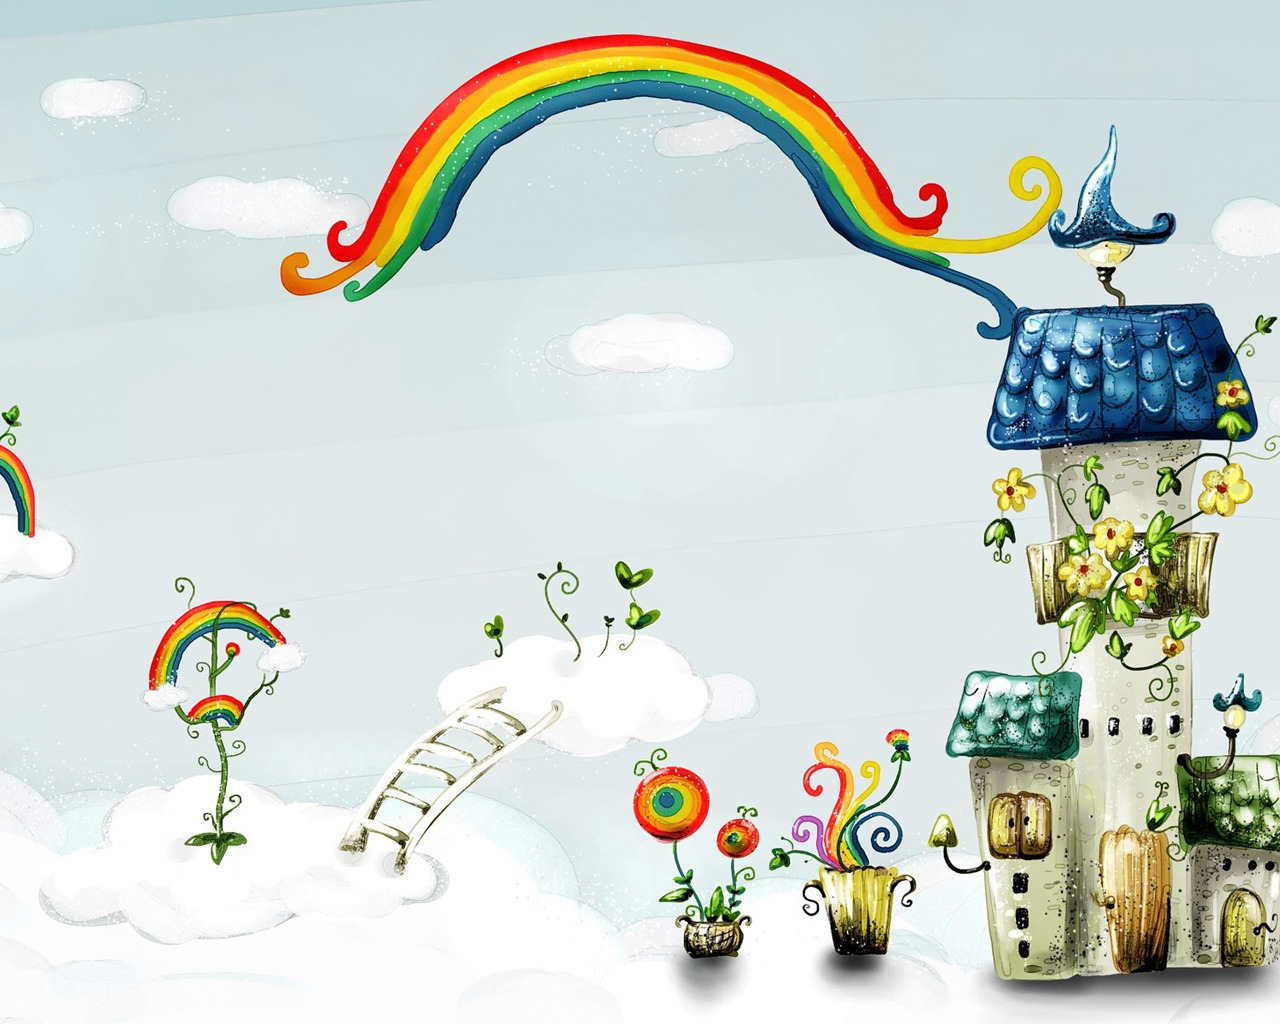 Rainbow and House for 1280 x 1024 resolution